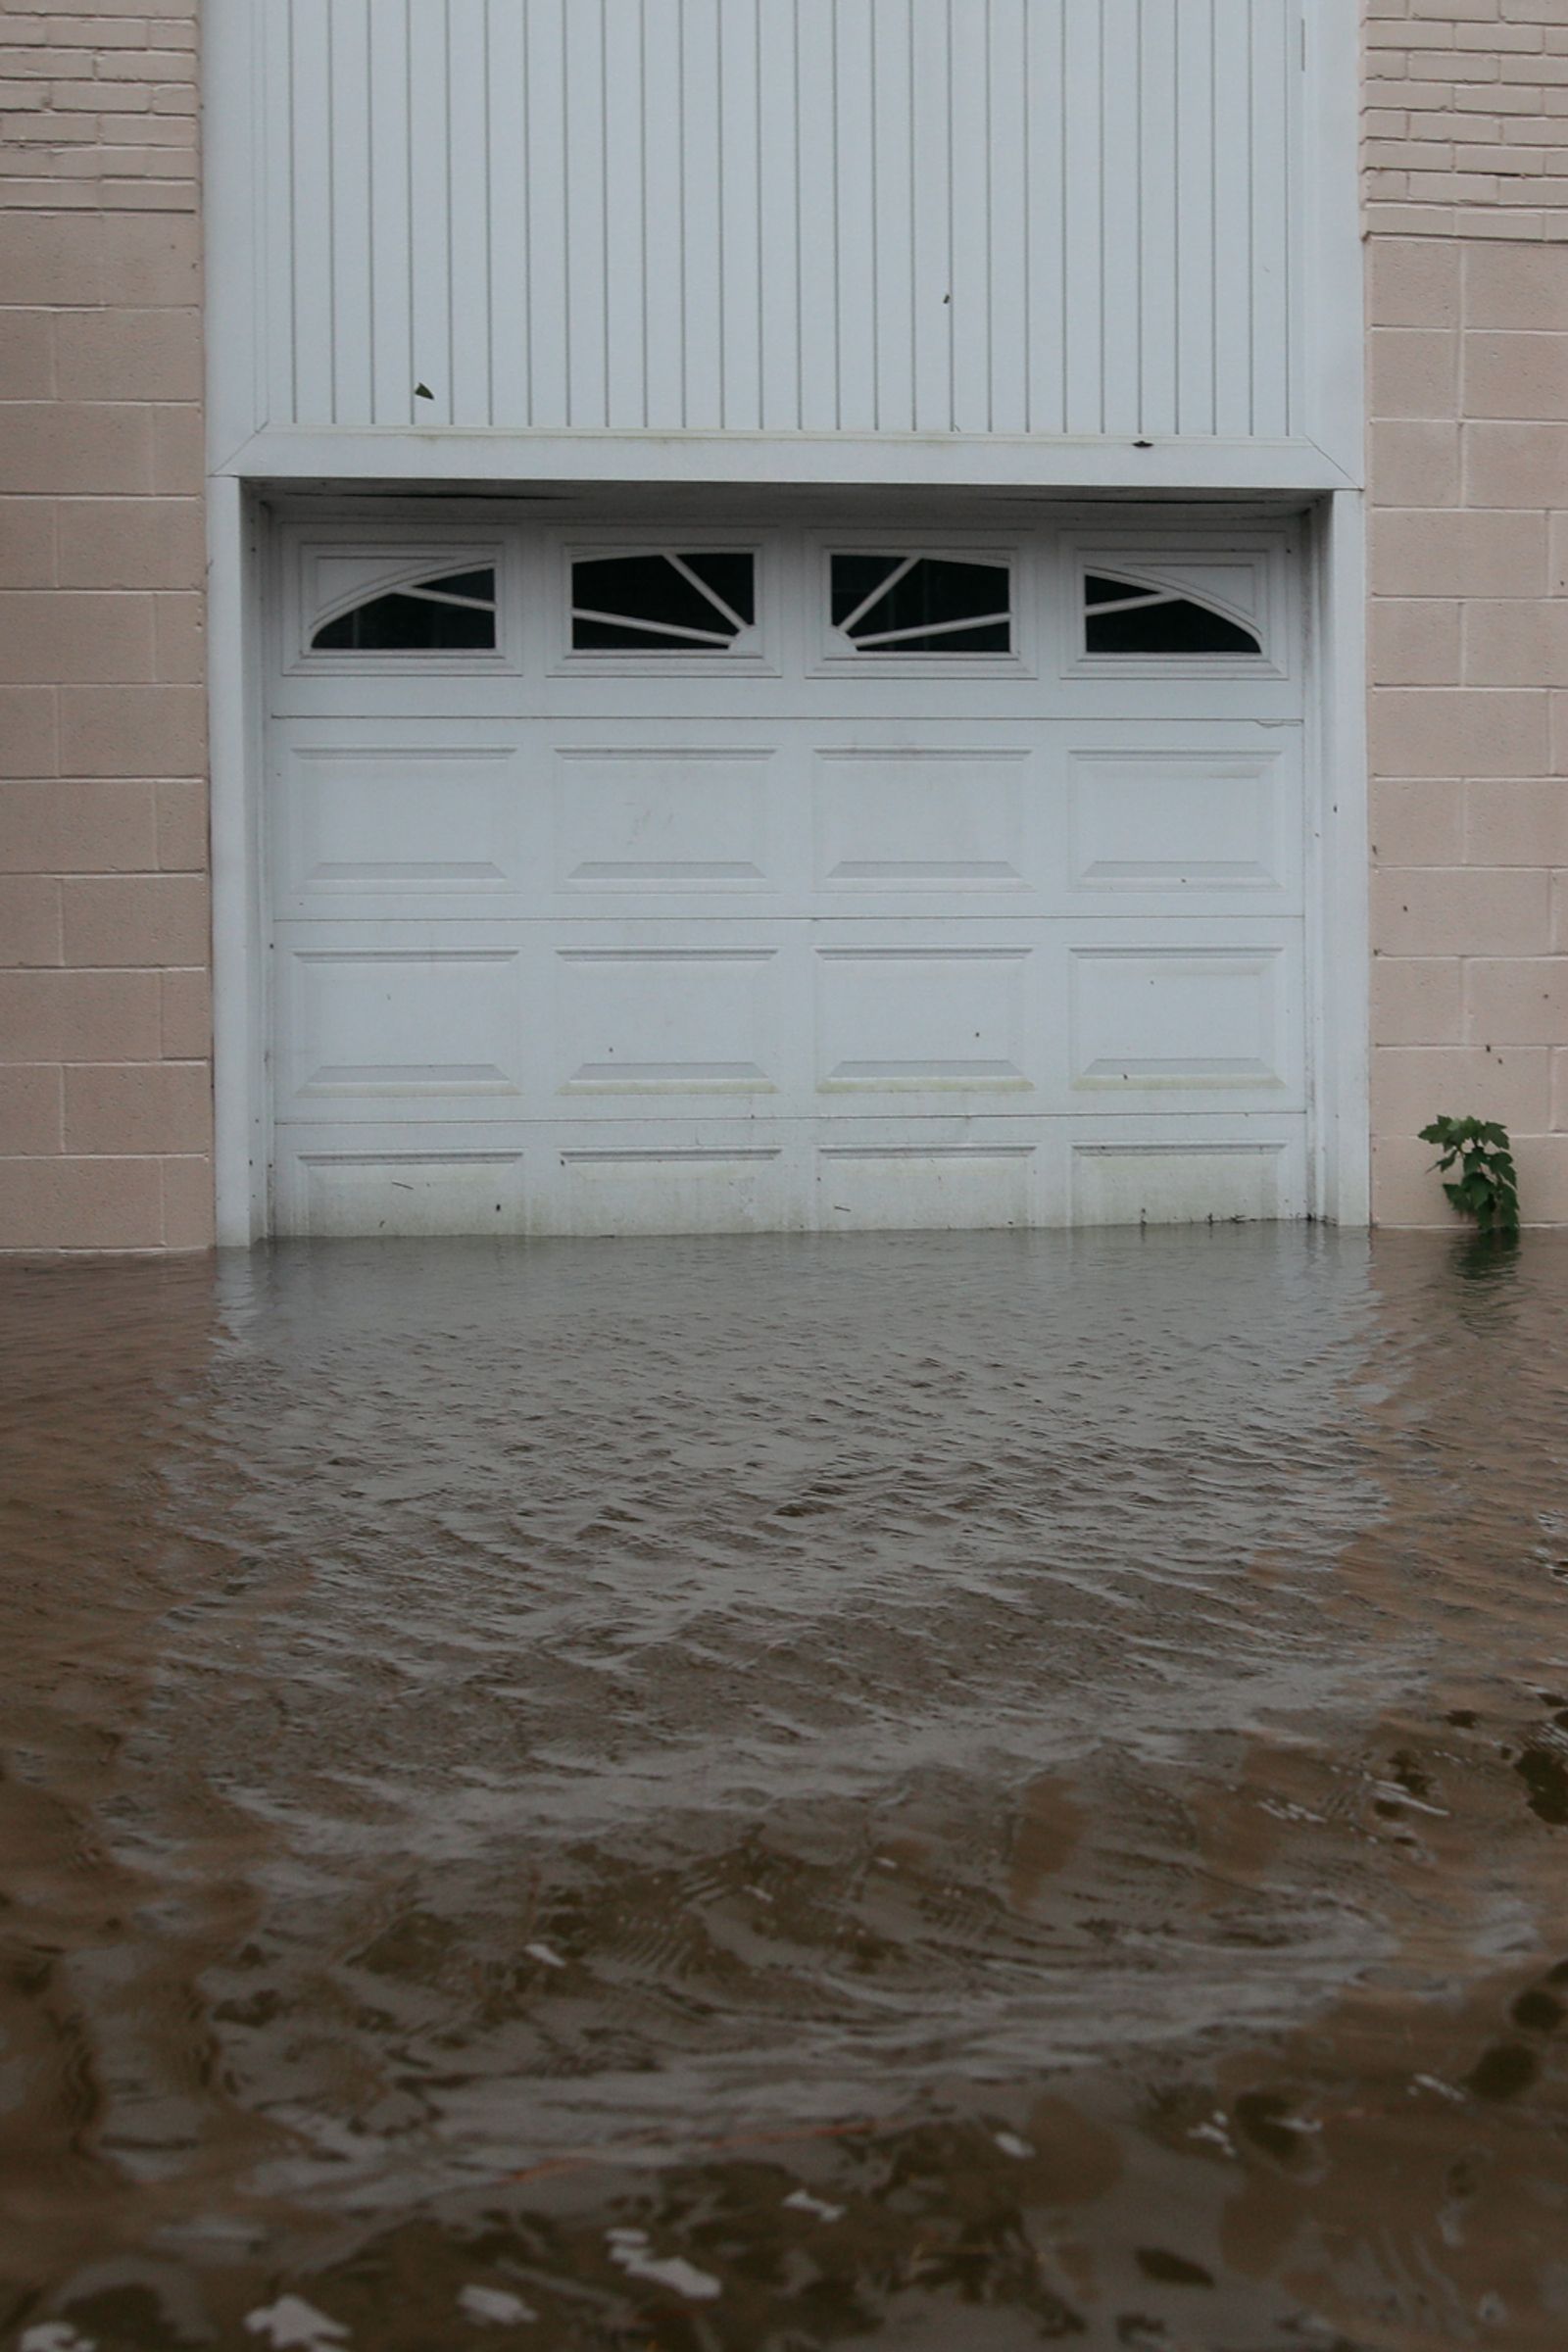 © Angela Ramsey - As the waters rise it seeps into garages and porches throughout the neighborhood.